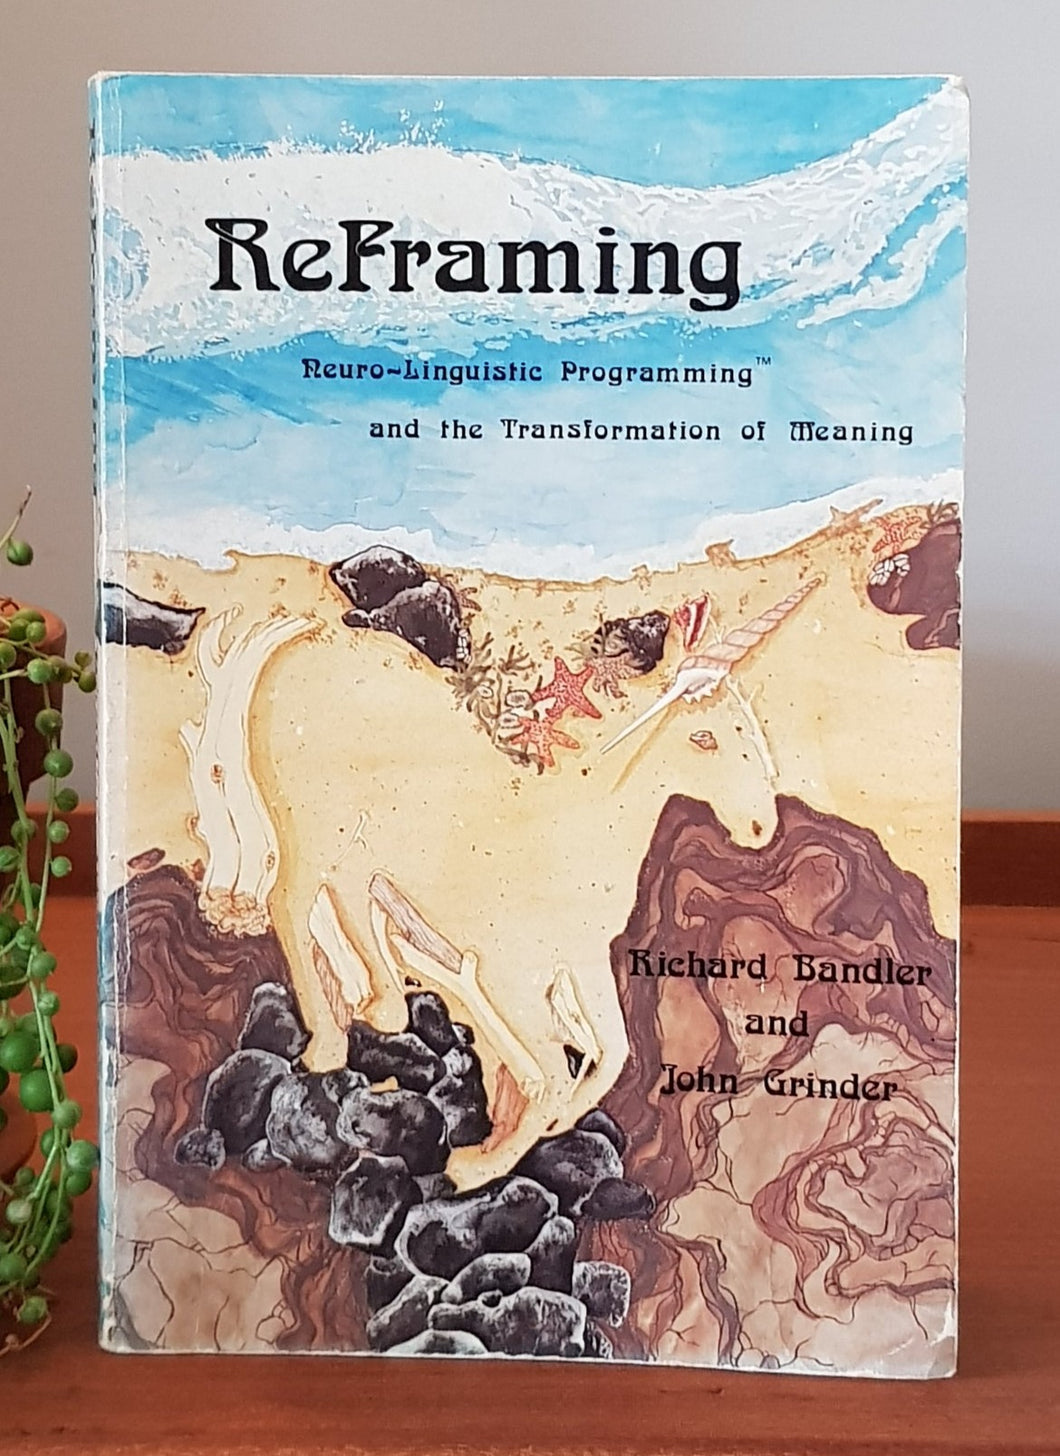 Reframing: Neuro-Linguistic Programming and the Transformation of Meaning by Richard Bandler, John Grinder